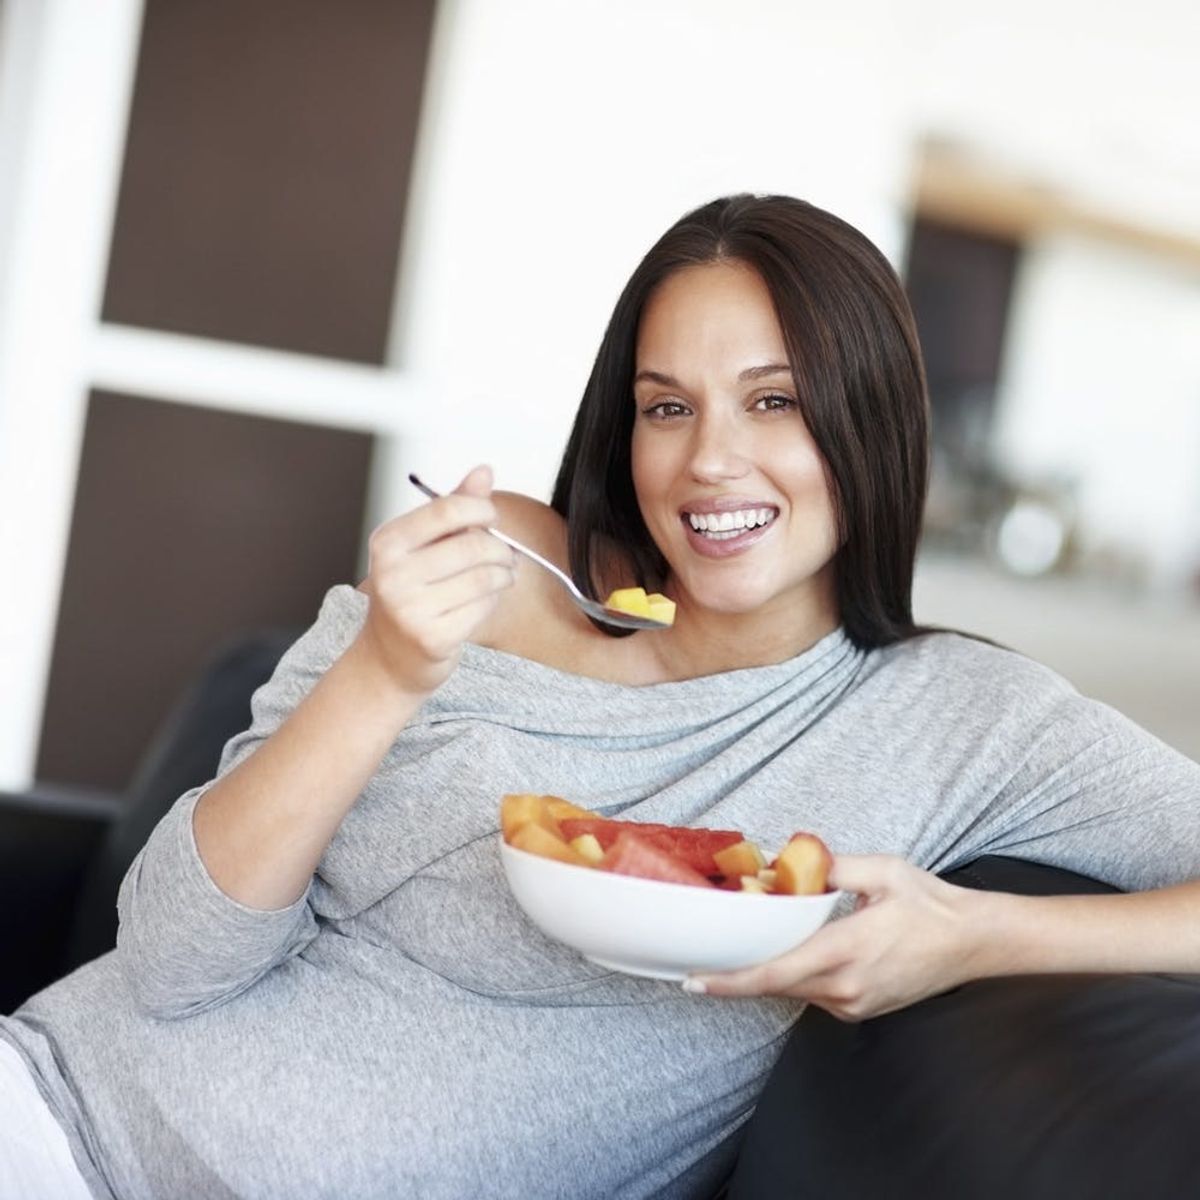 The 6 Best Superfoods to Help Morning Sickness